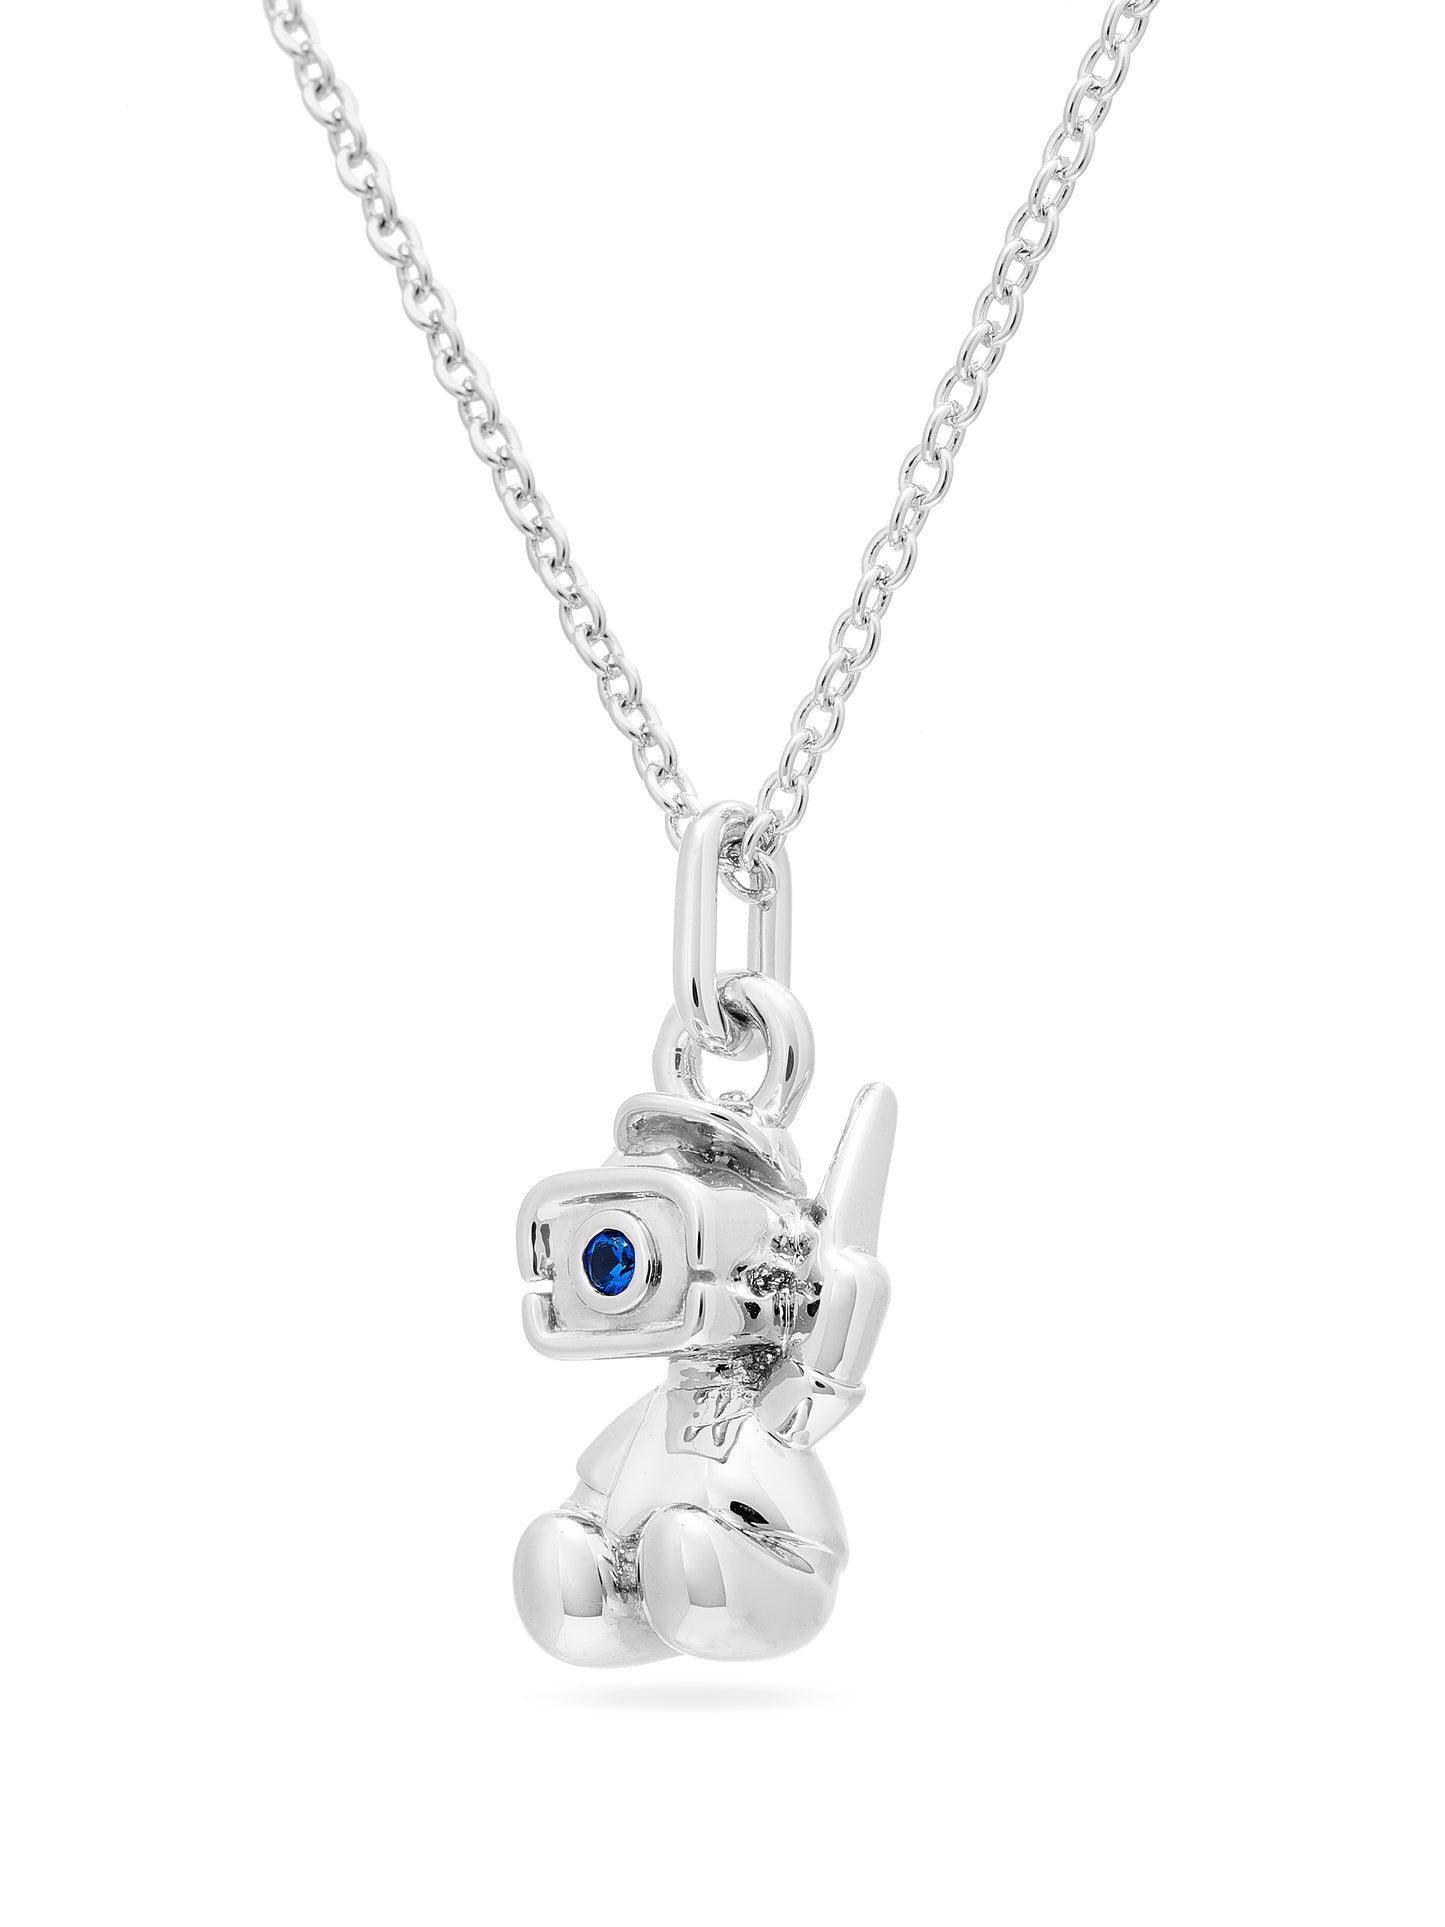 Robot Baby Dog Necklace